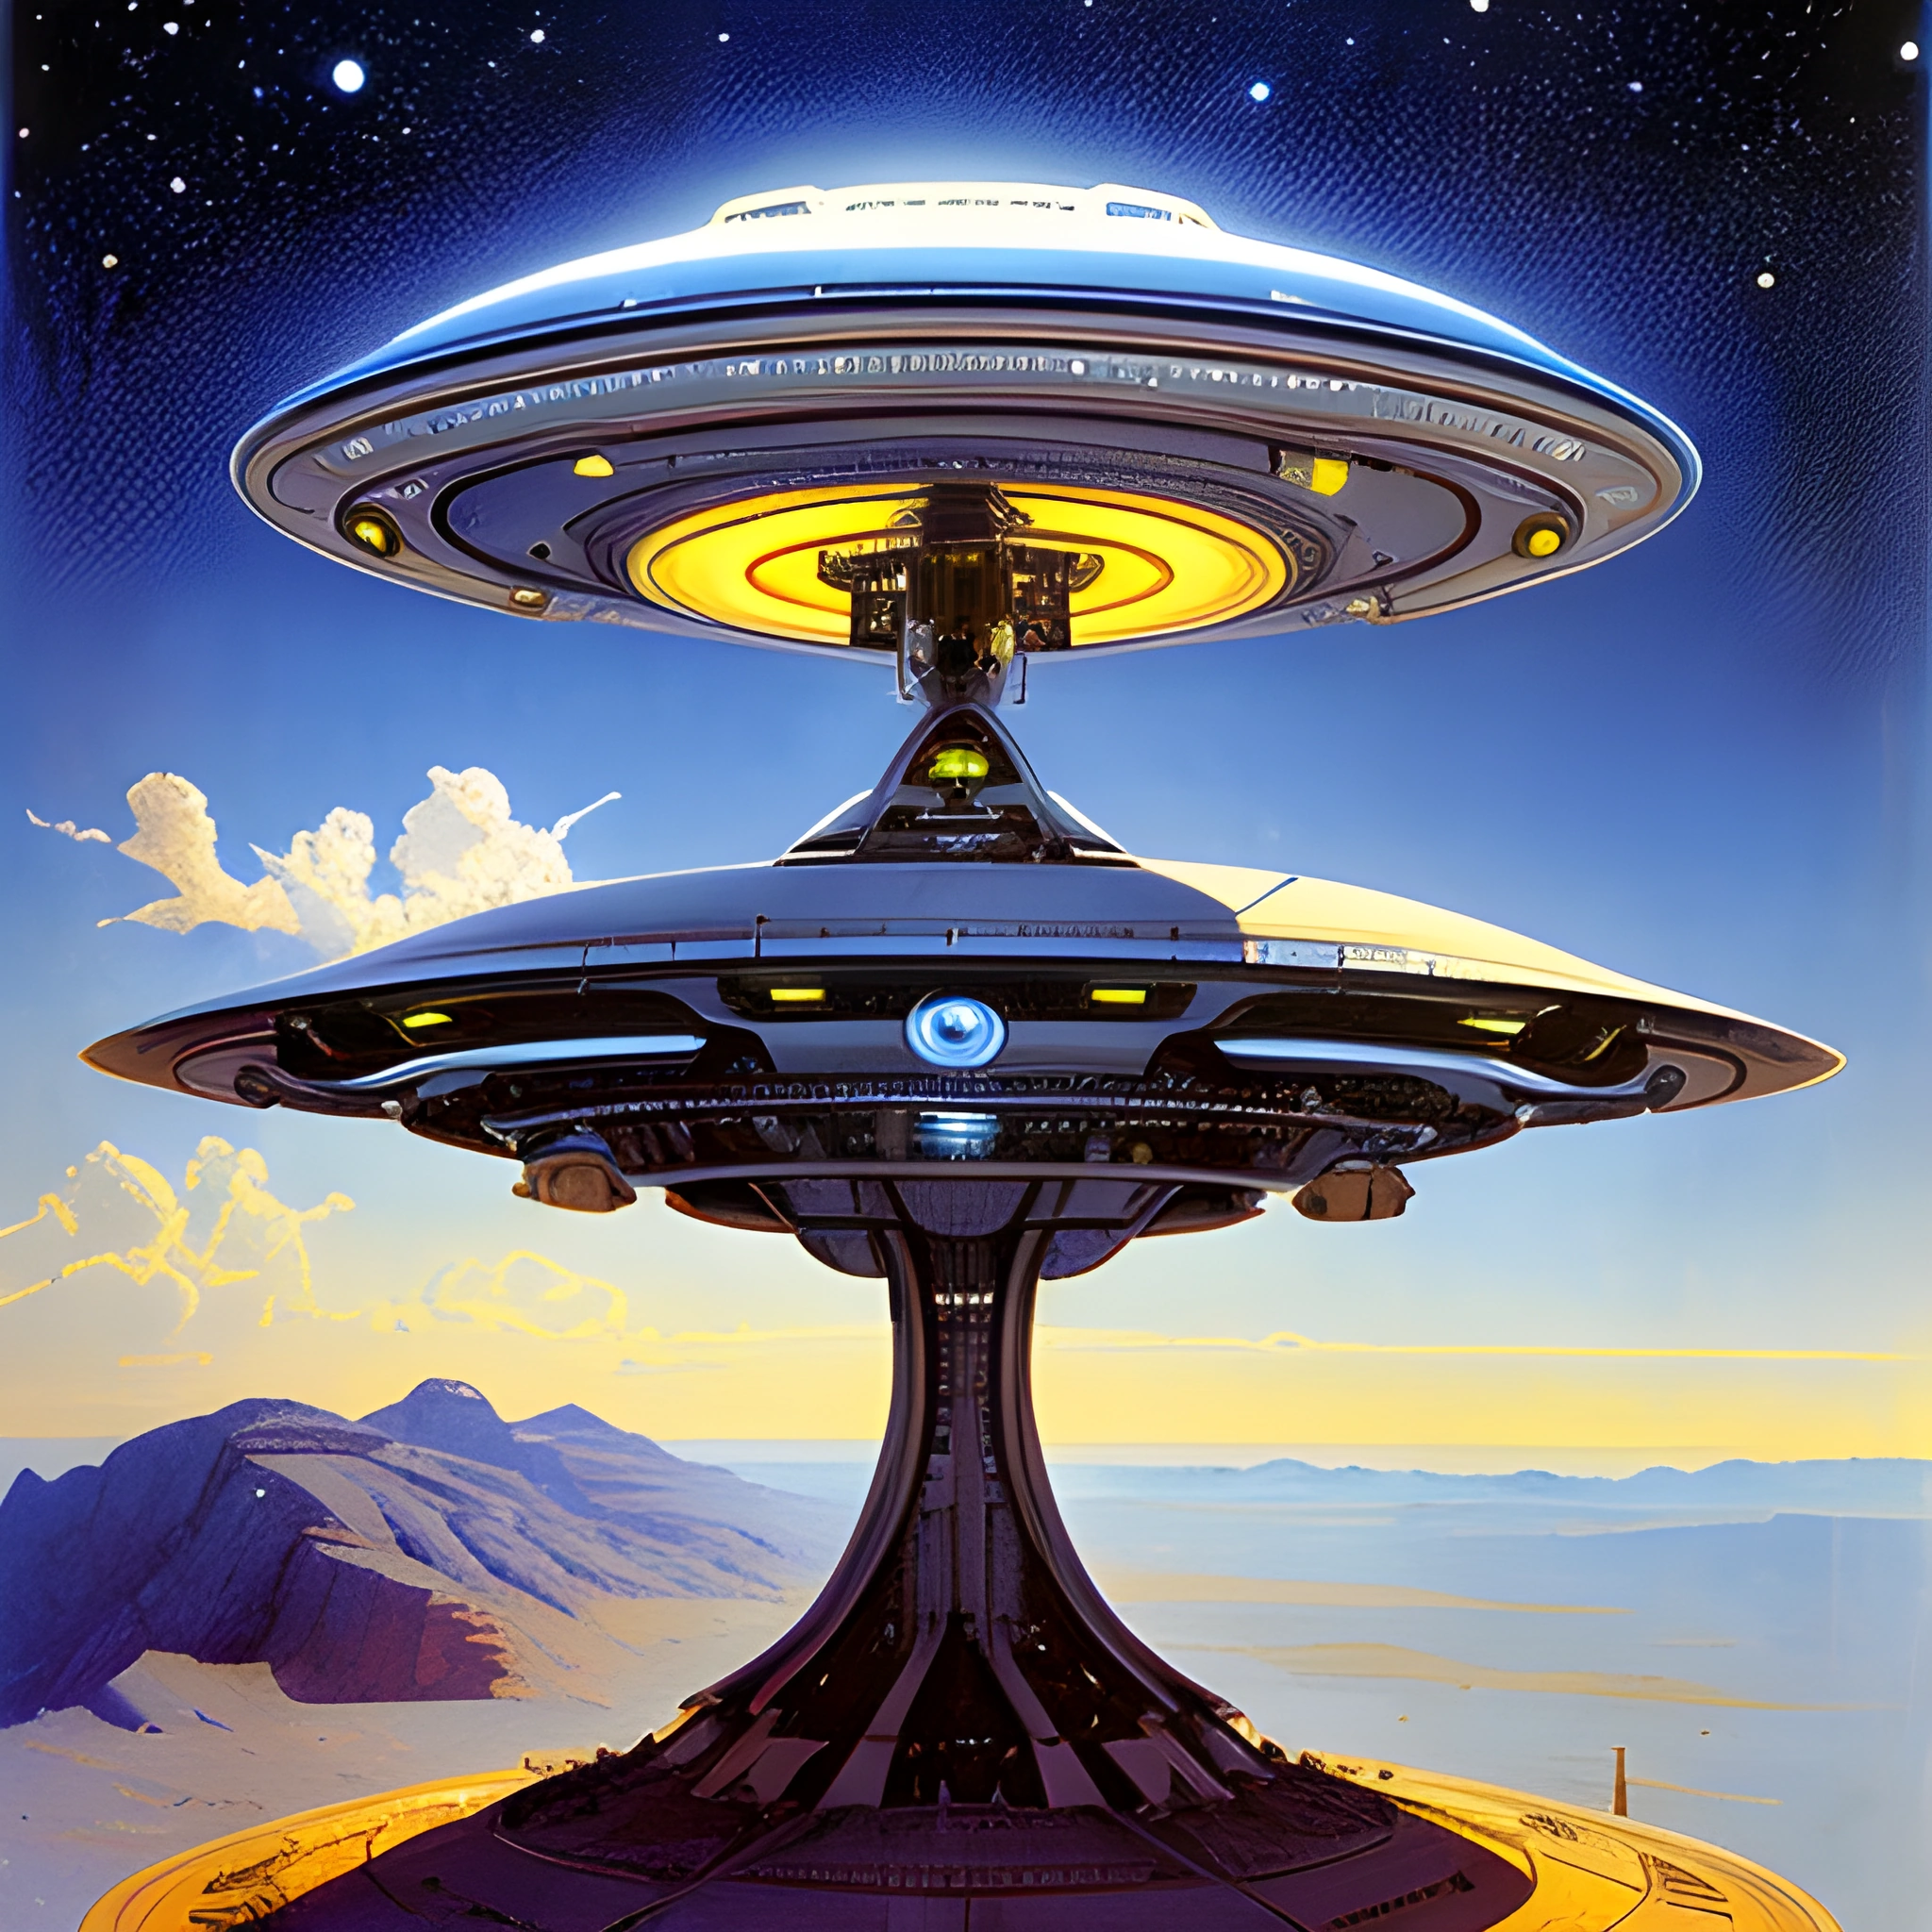 spaceship flying over a futuristic city with a mountain in the background